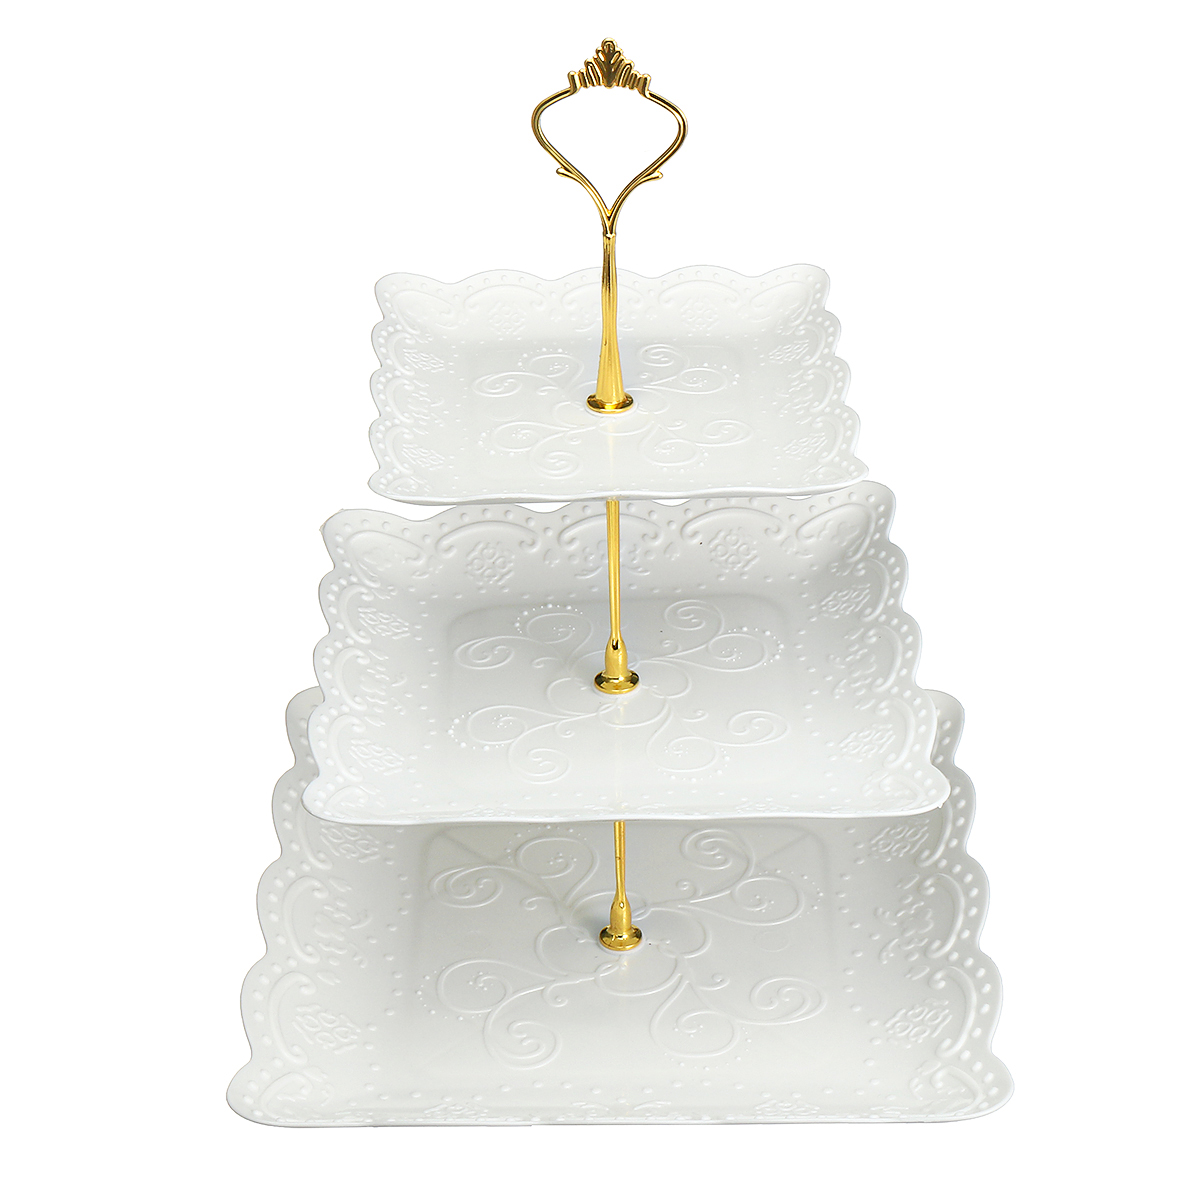 European-style-23-Tier-Fruit-Plate-Dessert-Tray-Cake-Table-Multi-layer-Cake-Stand-Cake-Setting-Table-1926348-14